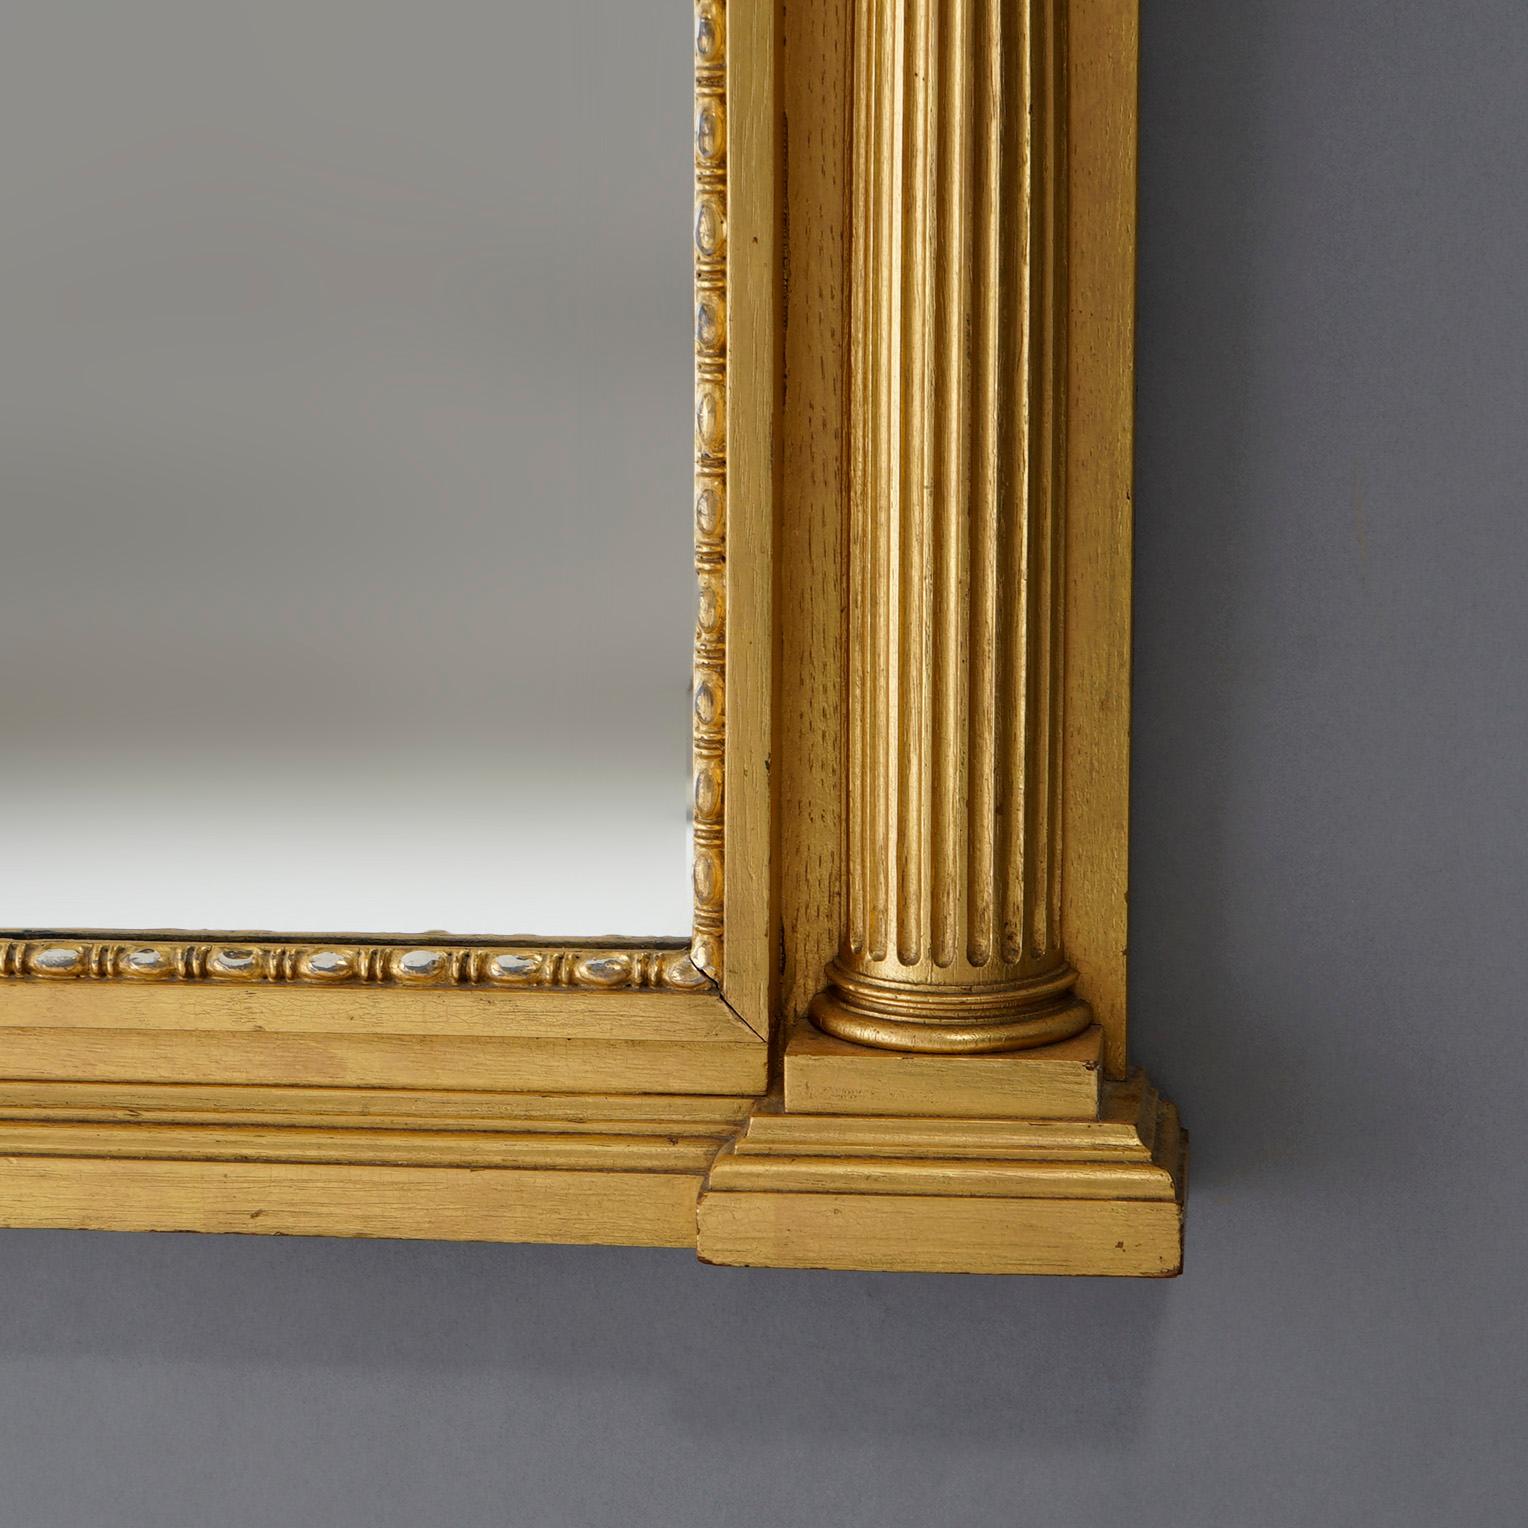 Antique French Empire Classical Greco Style Giltwood Wall Mirror 19th C For Sale 2